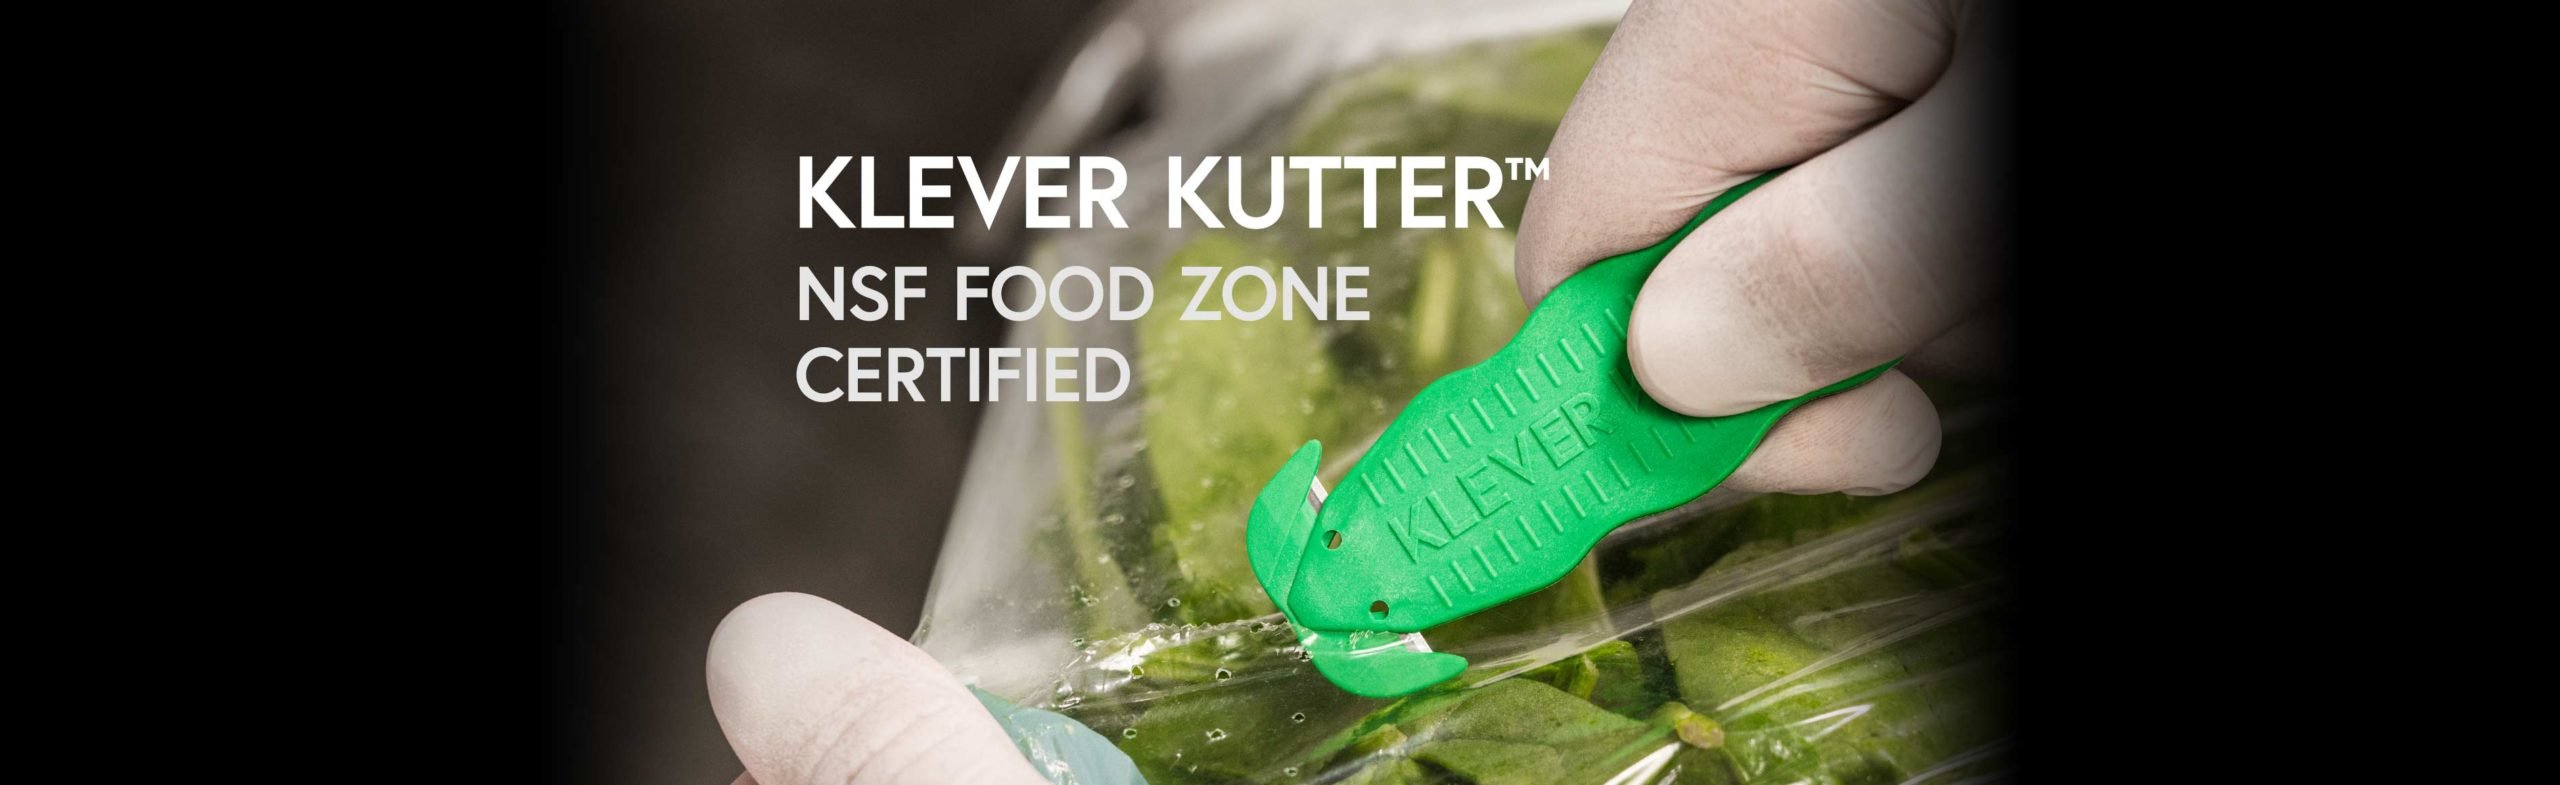 Klever Kutter (Food Service Product) - Trading Solutions Worldwide, Inc